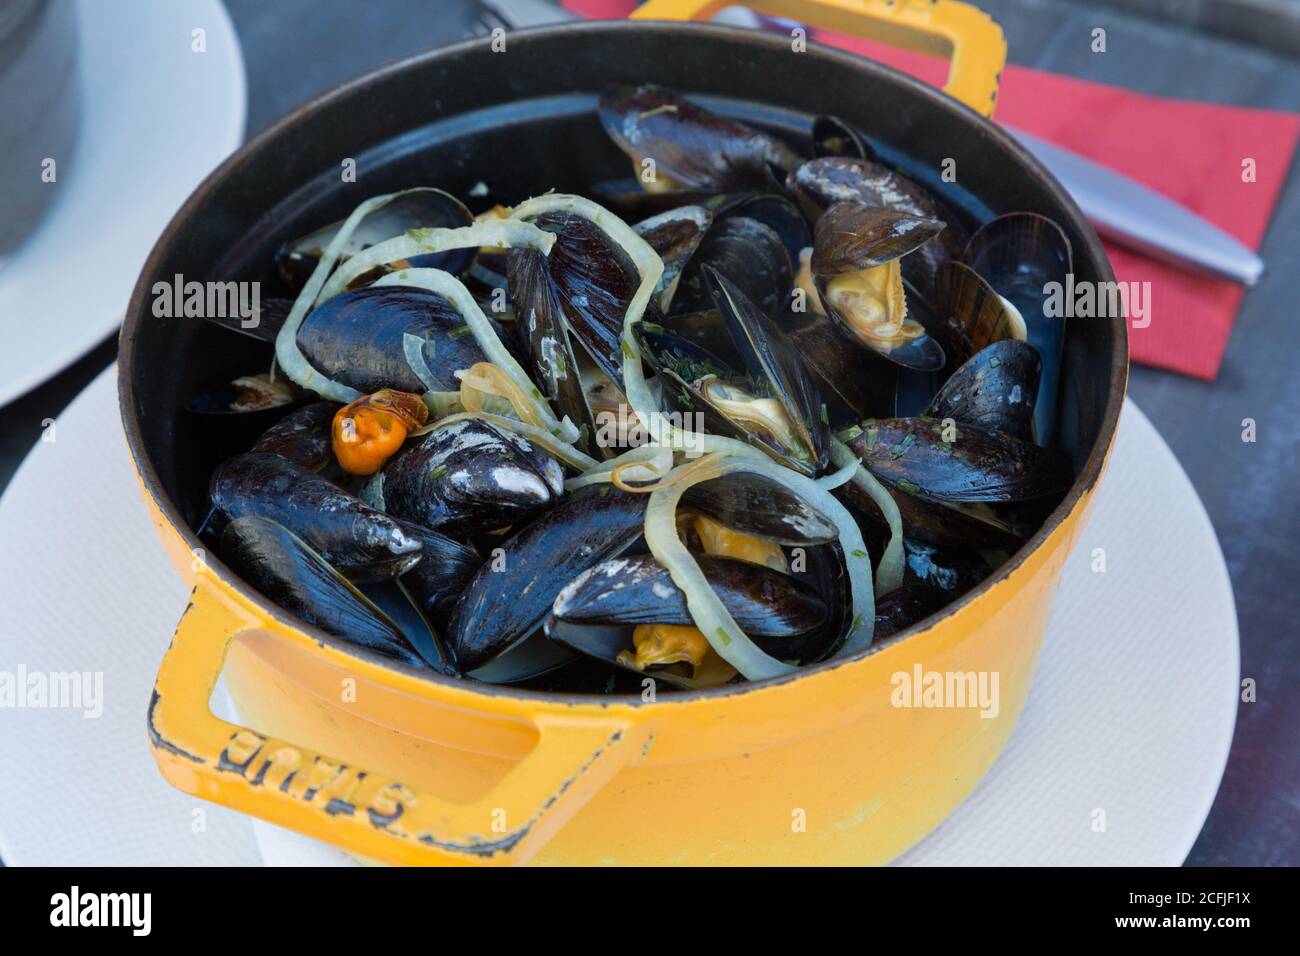 dish of mussel served Stock Photo